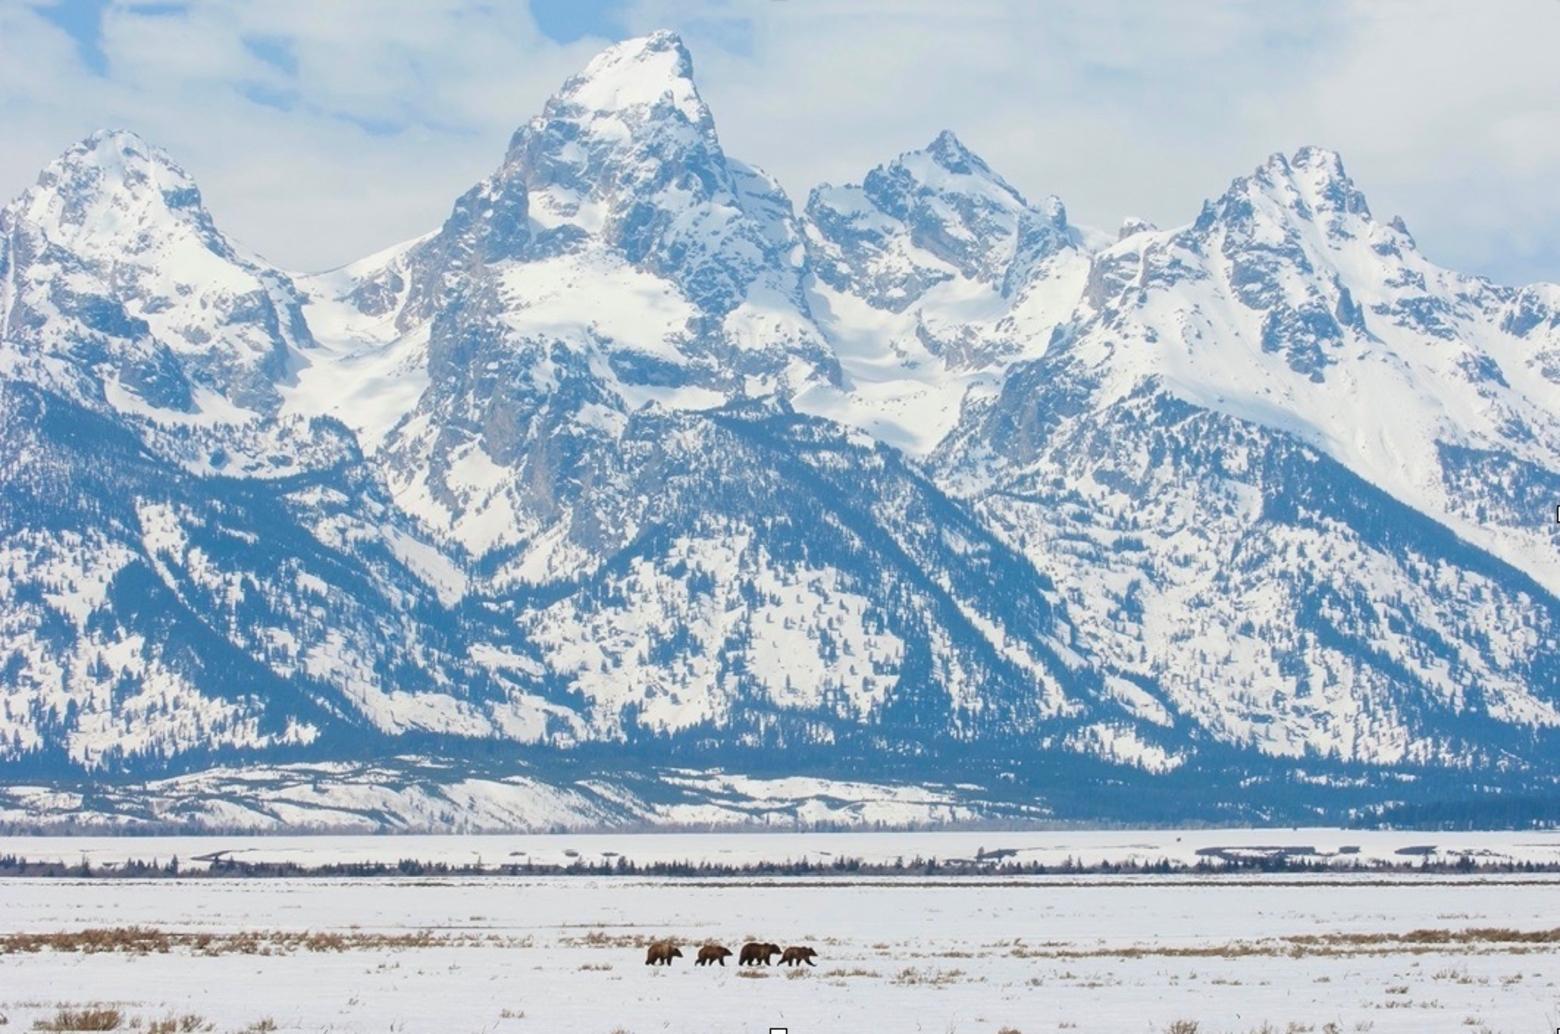 399 and one of her three groups of triplets headed north in front of the Tetons. Photo courtesy Thomas D. Mangelsen (mangelsen.com)